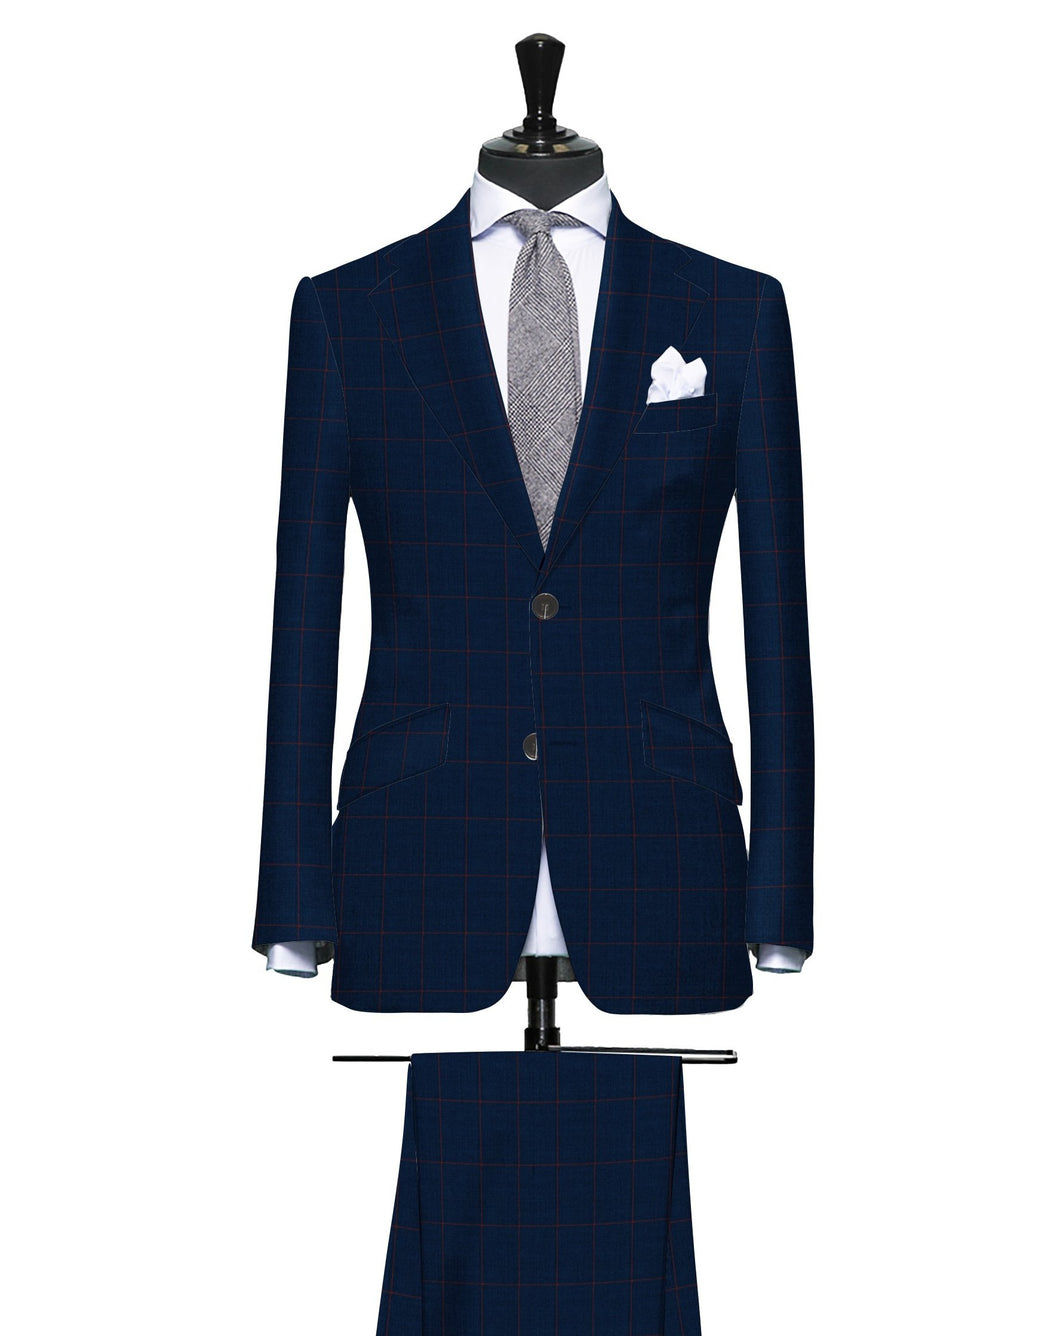 Rich Blue with Red Accent Windowpane, Super 150, Wool